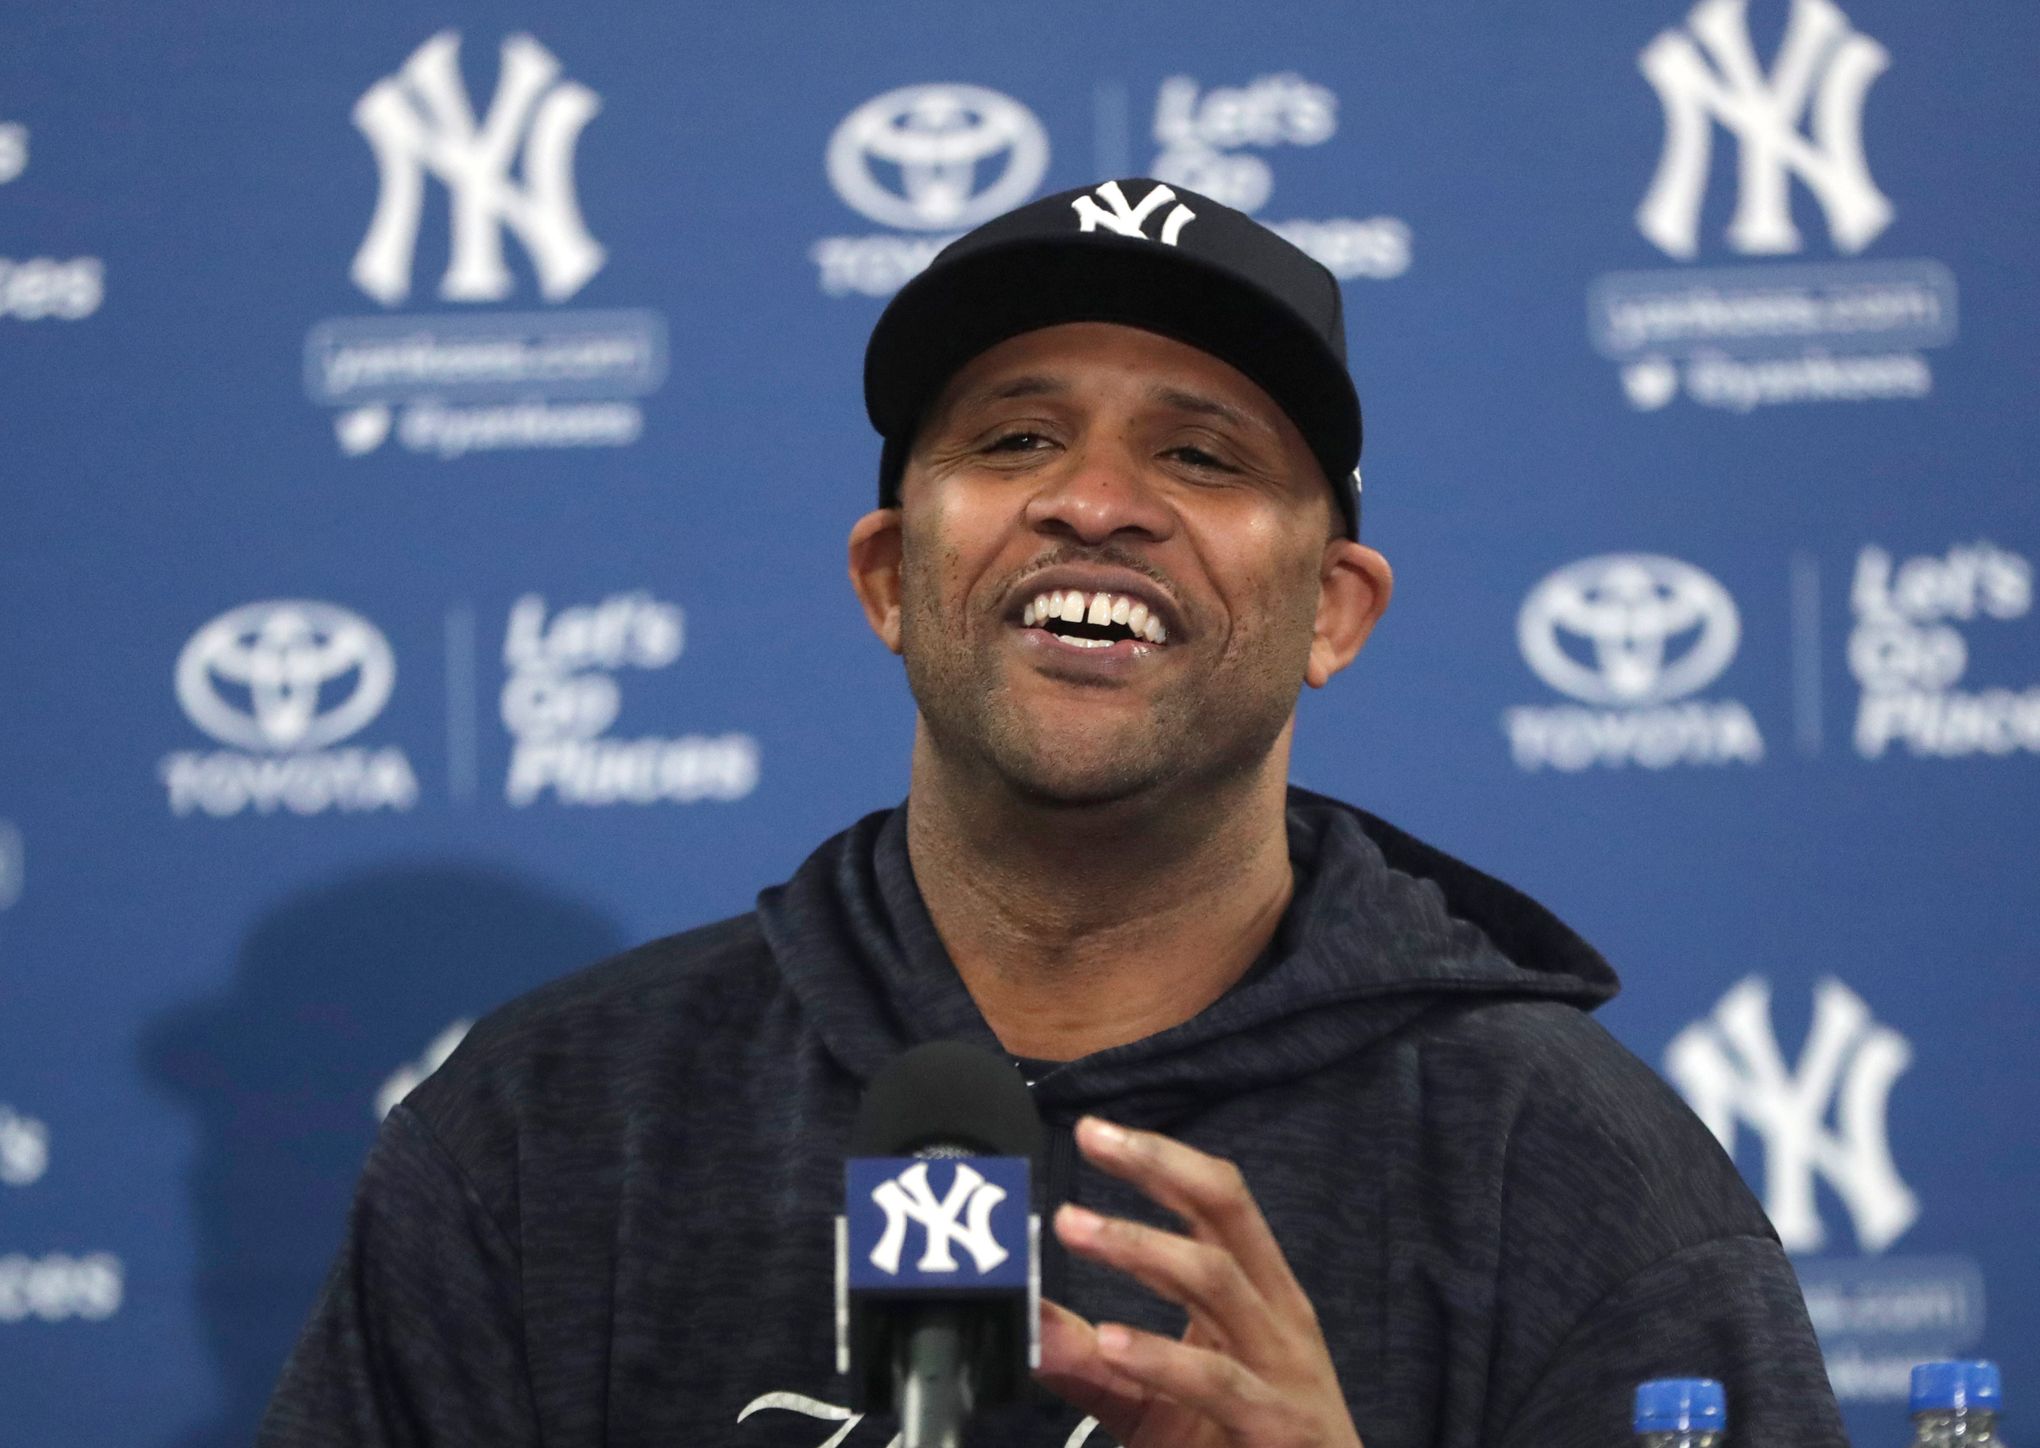 Sabathia looking to end career with 2019 victory parade